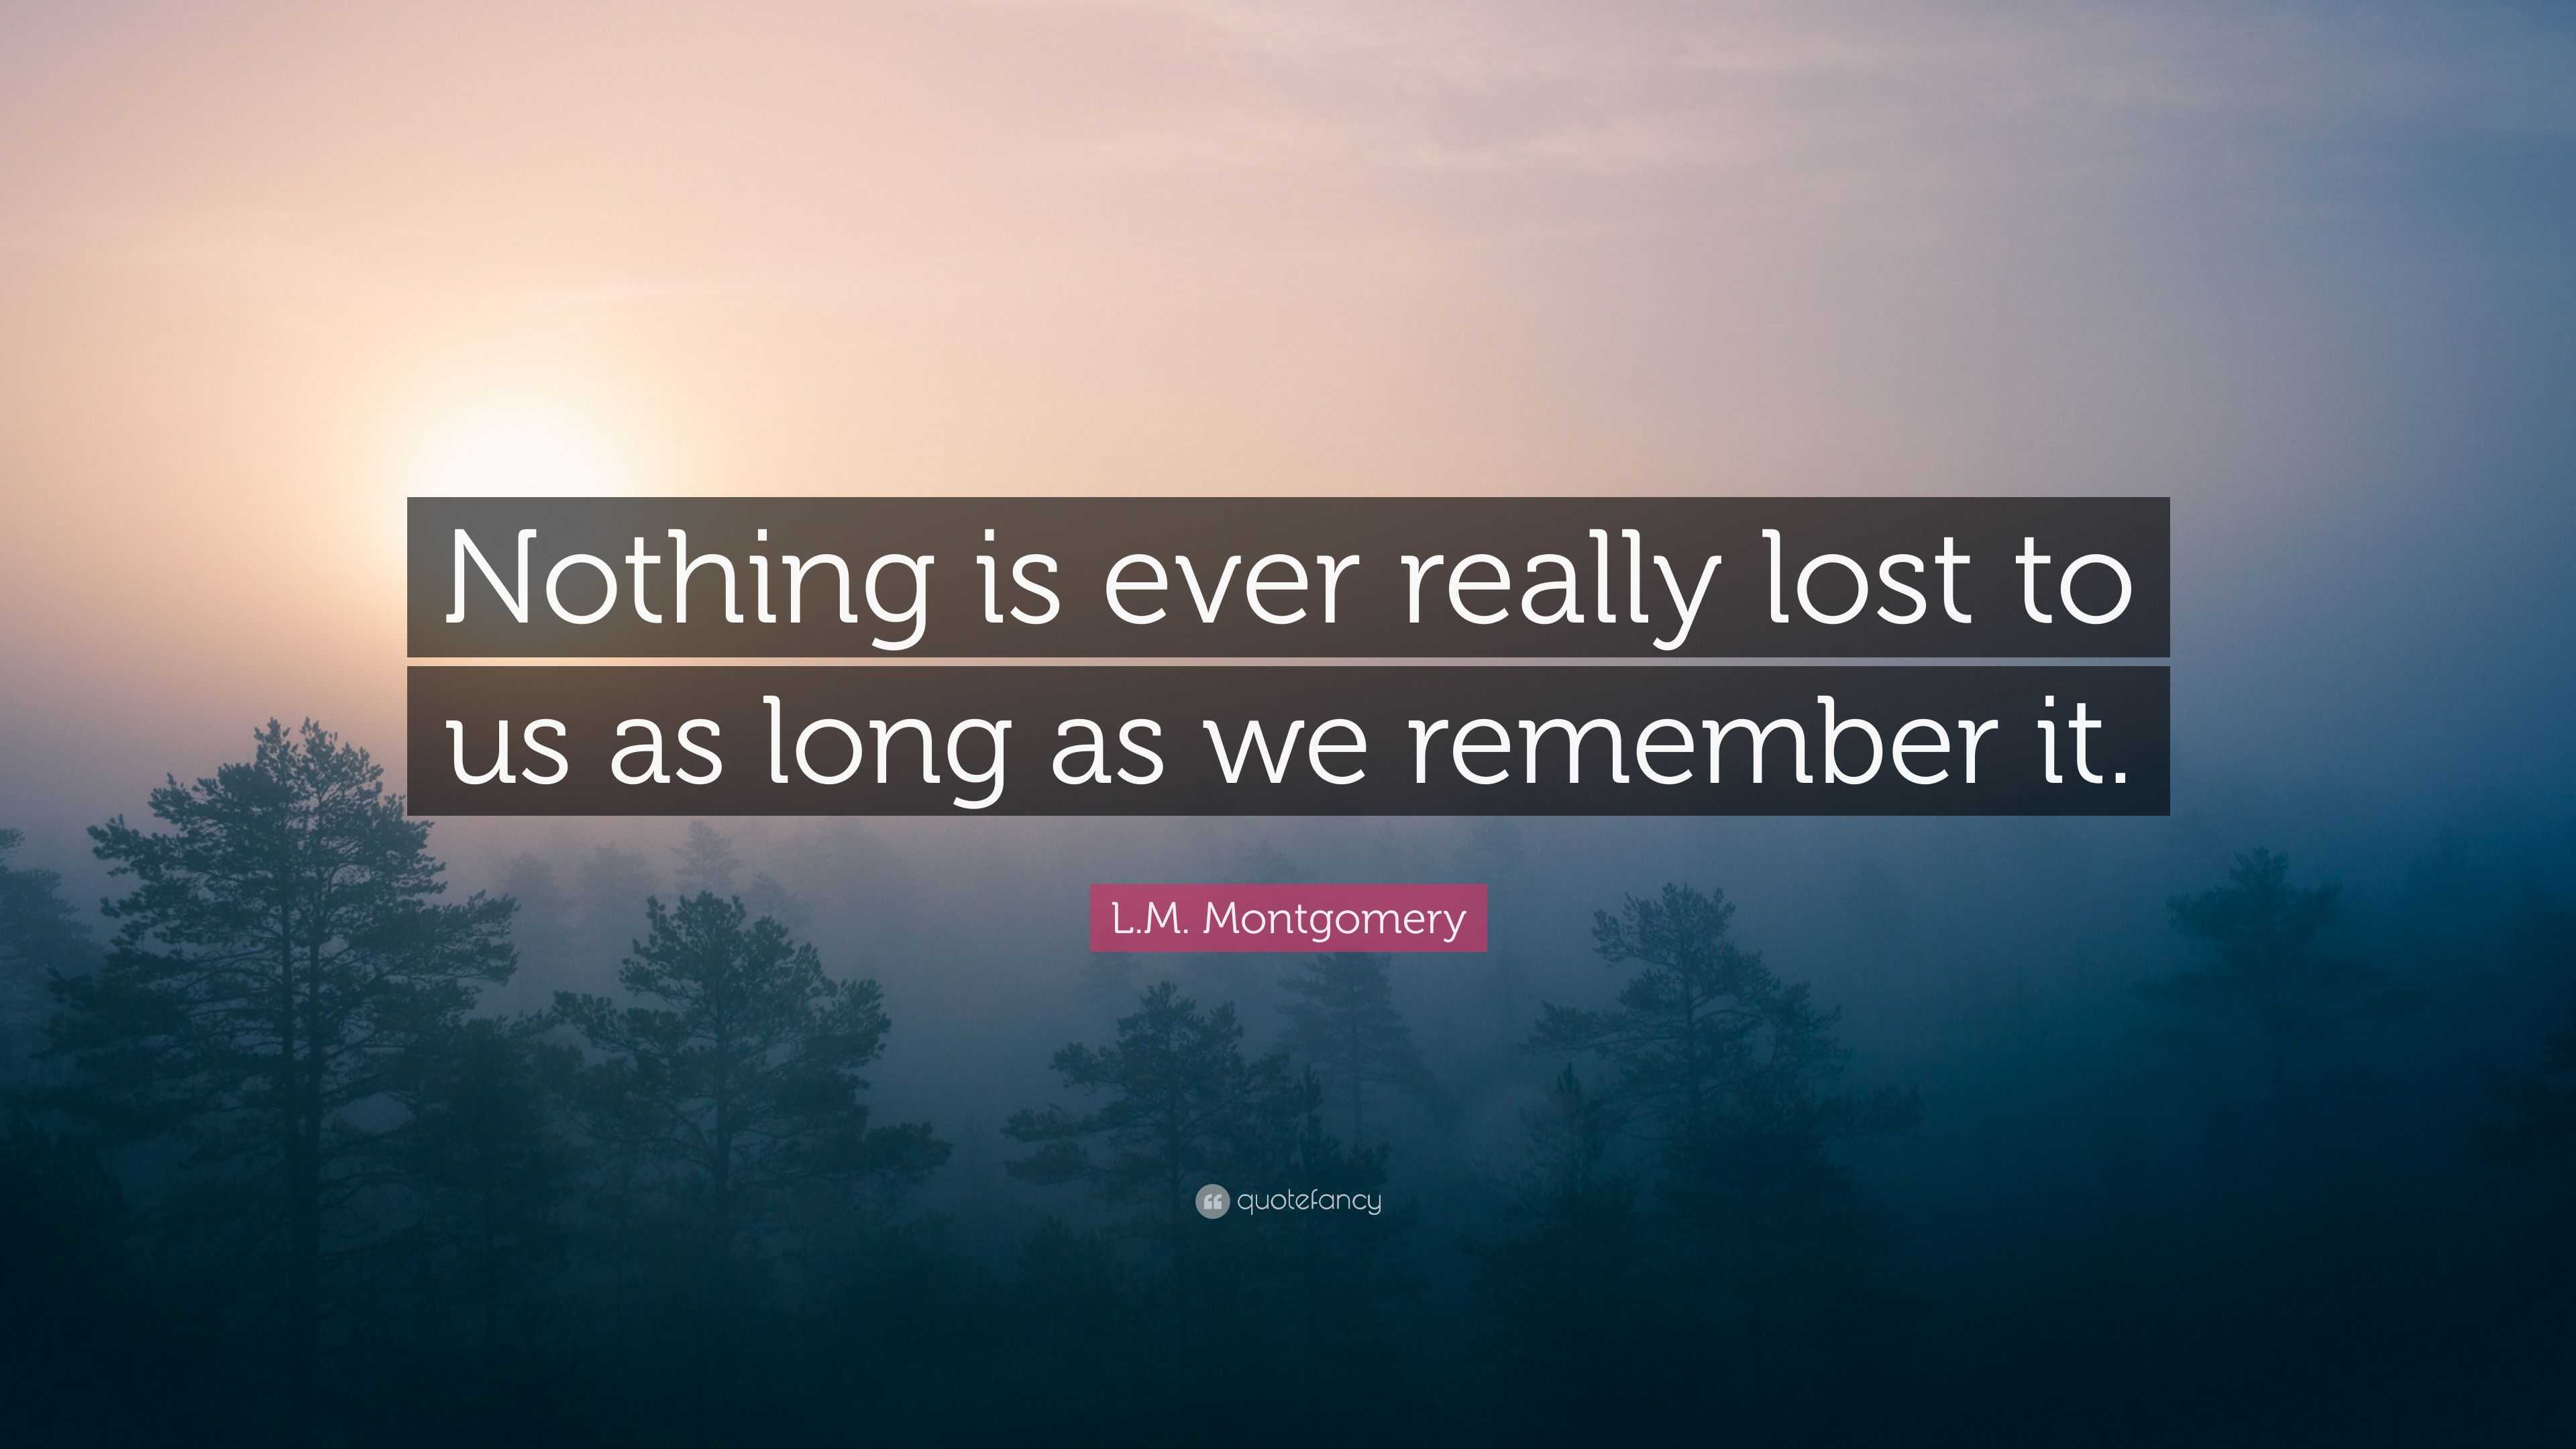 L.M. Montgomery Quote: “Nothing is ever really lost to us as long as we ...